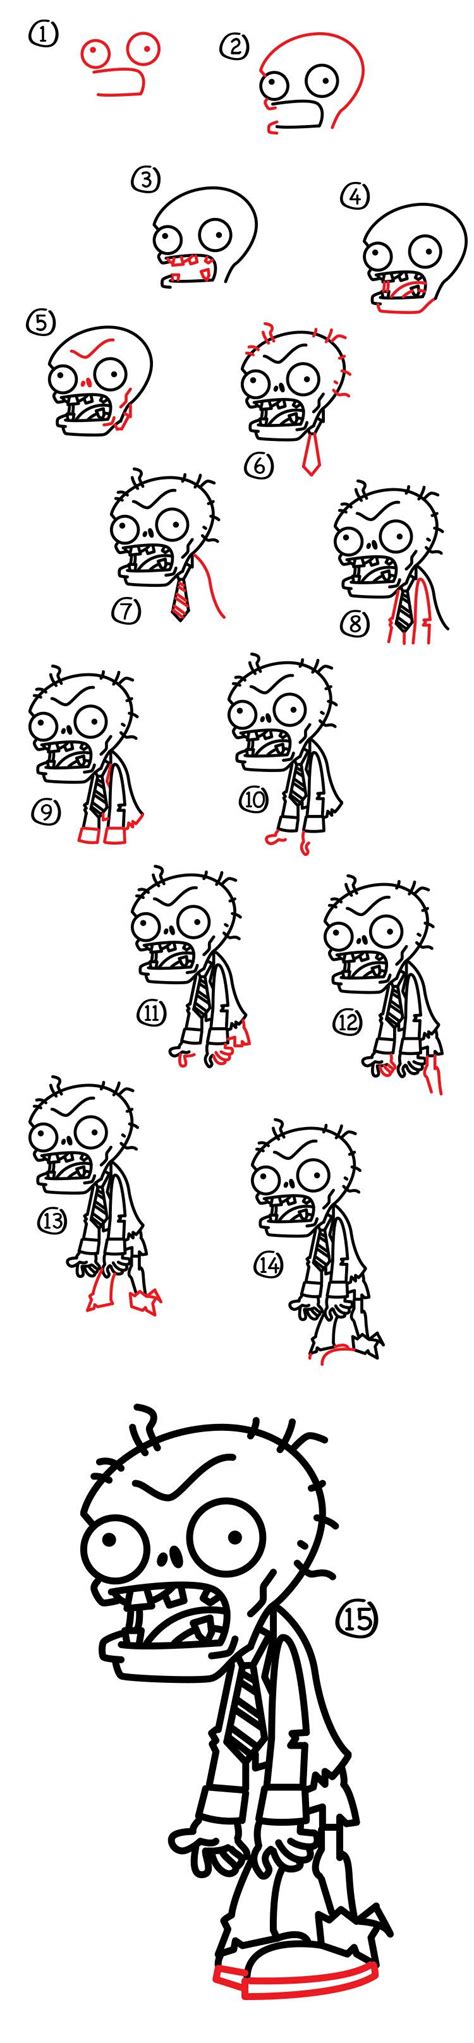 How To Draw A Zombie From Plants Vs Zombies Plants Vs Zombies Zombie